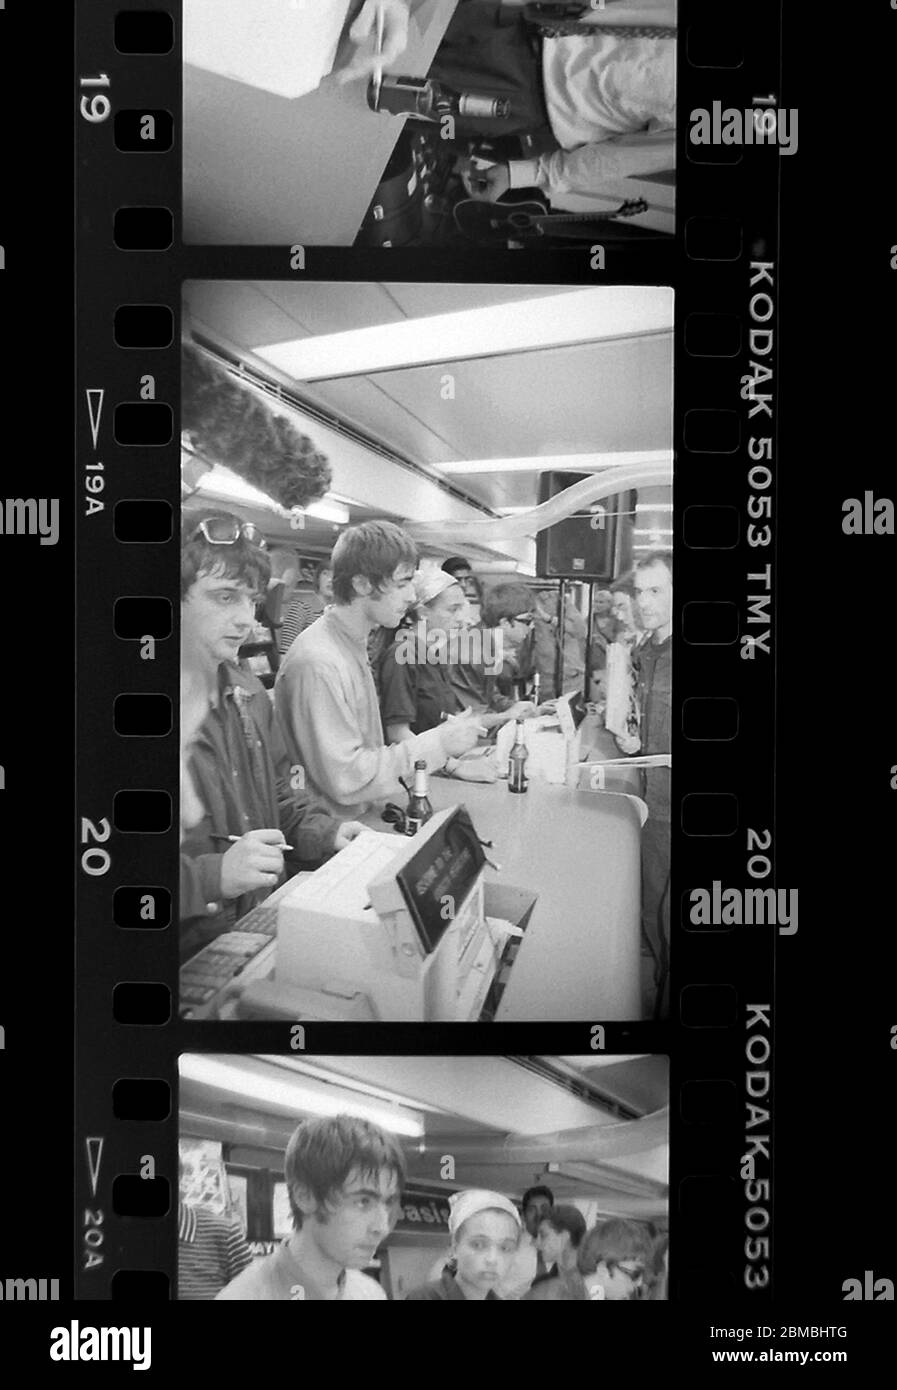 Oasis record signing at the Virgin Megastore, Oxford Street, London ahead of the release of Definitely Maybe. 29th August 1994 Photographed by James Boardman. Stock Photo